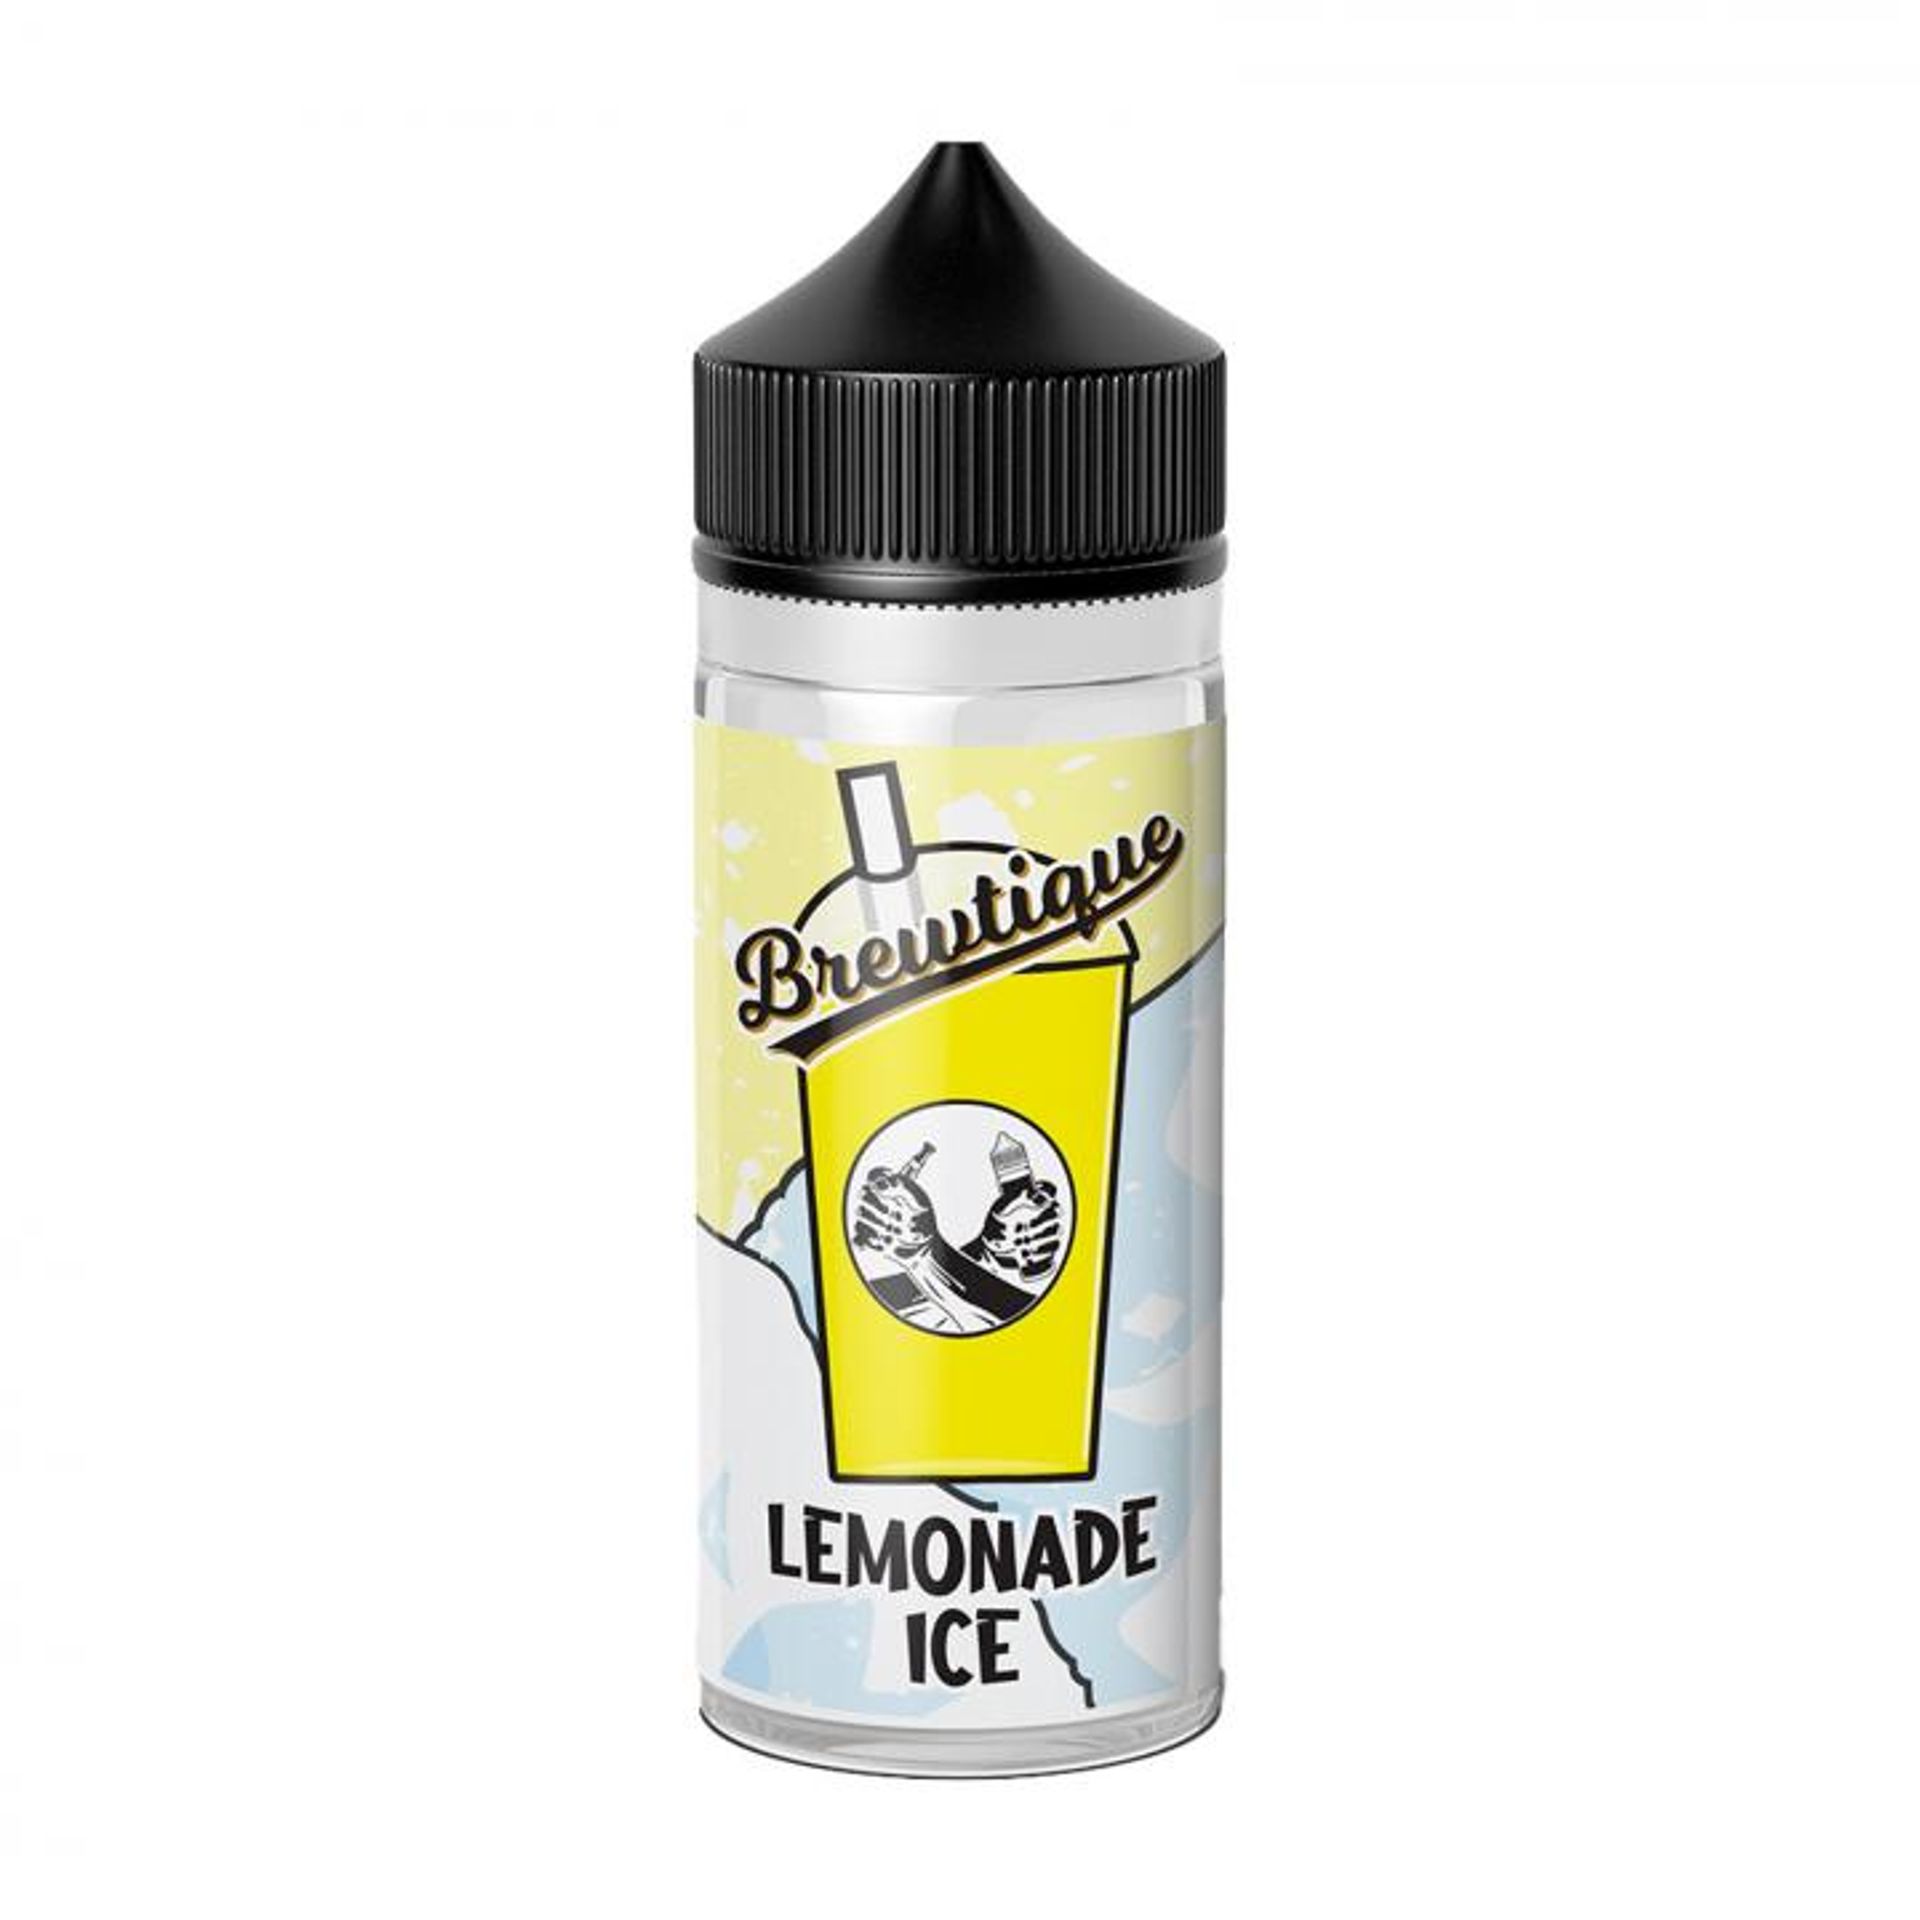 Image of Lemonade Ice by Brewtique